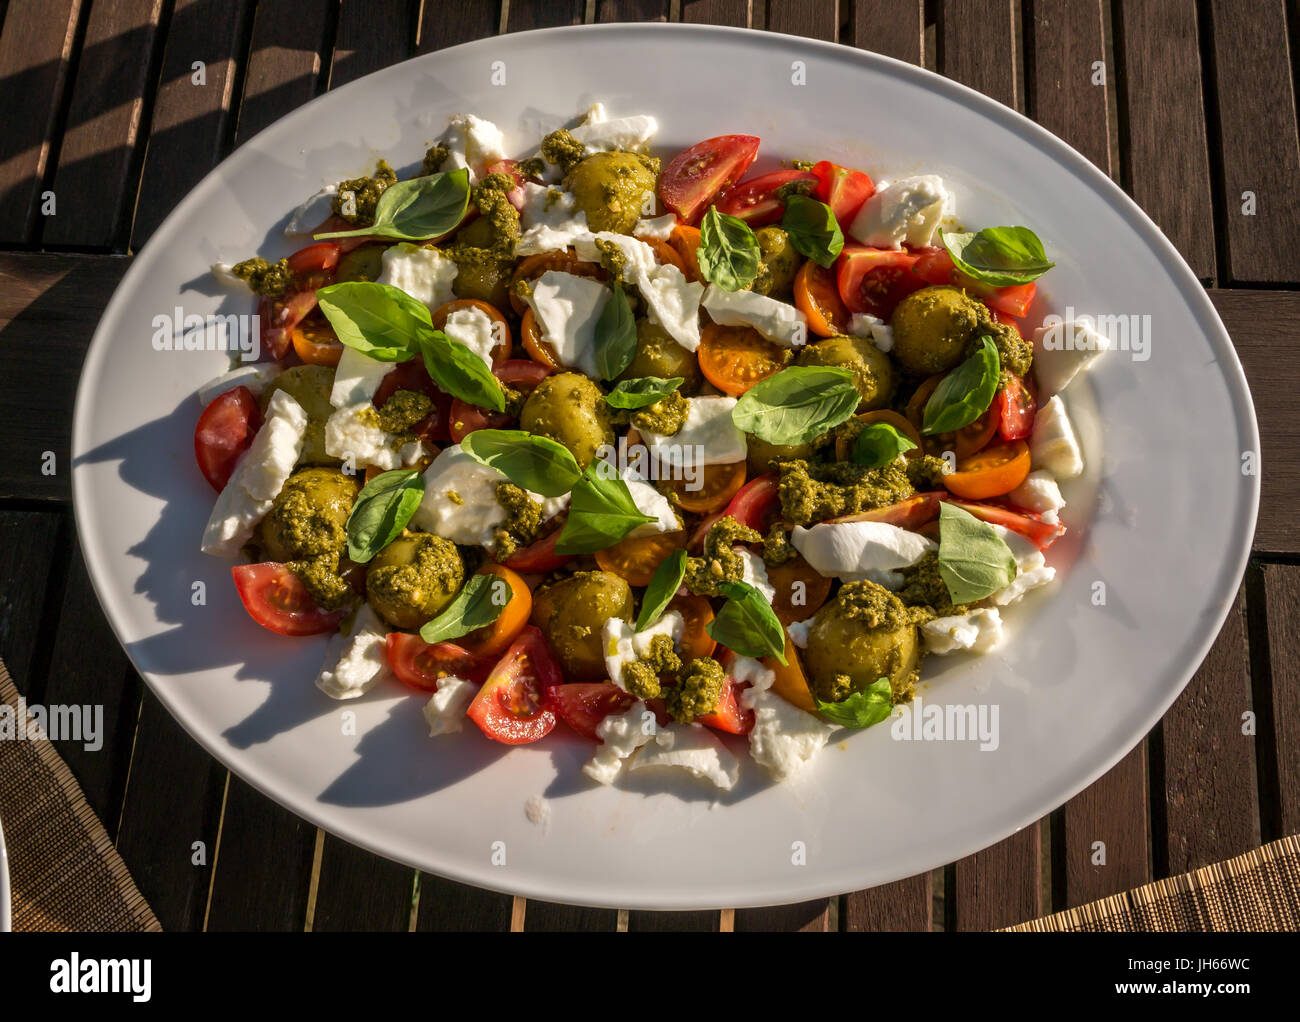 Caprese salad with pesto and cold boiled potatoes, served on white crockery, on garden patio table in Summer sunshine, Scotland, UK Stock Photo